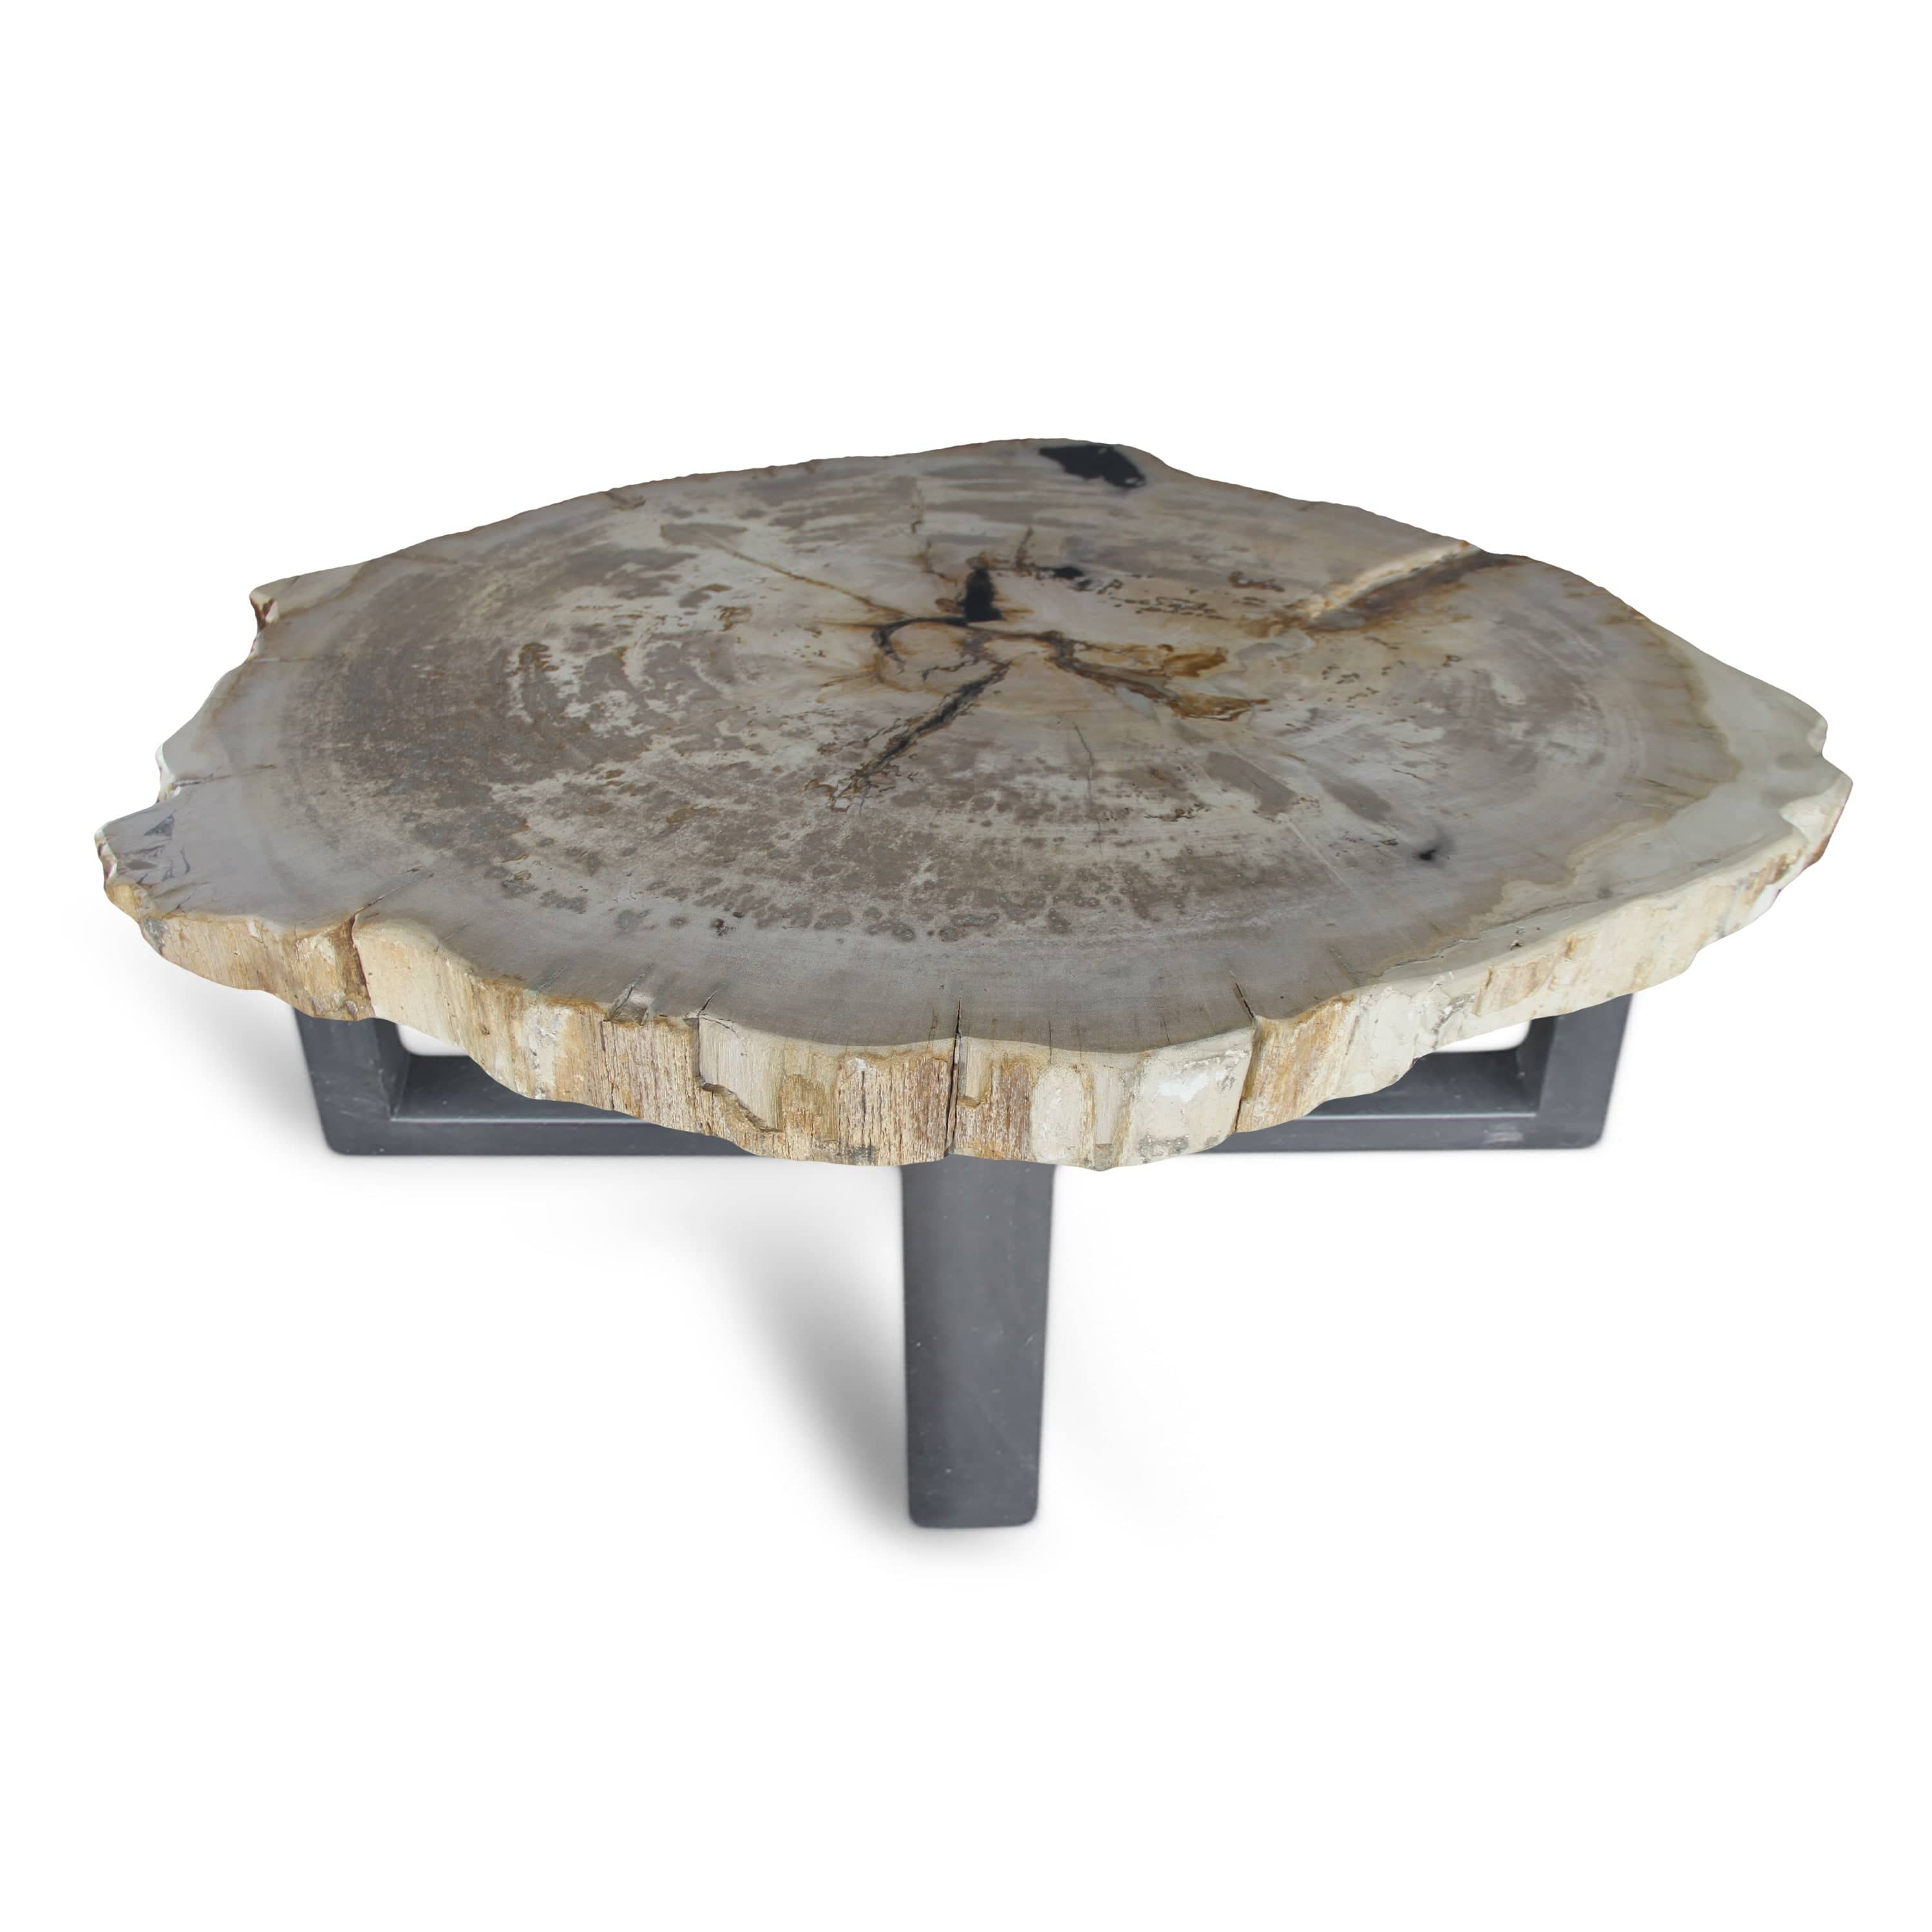 Kalifano Petrified Wood Petrified Wood Round Slab Coffee Table from Indonesia - 39" / 180 lbs PWT6600.002